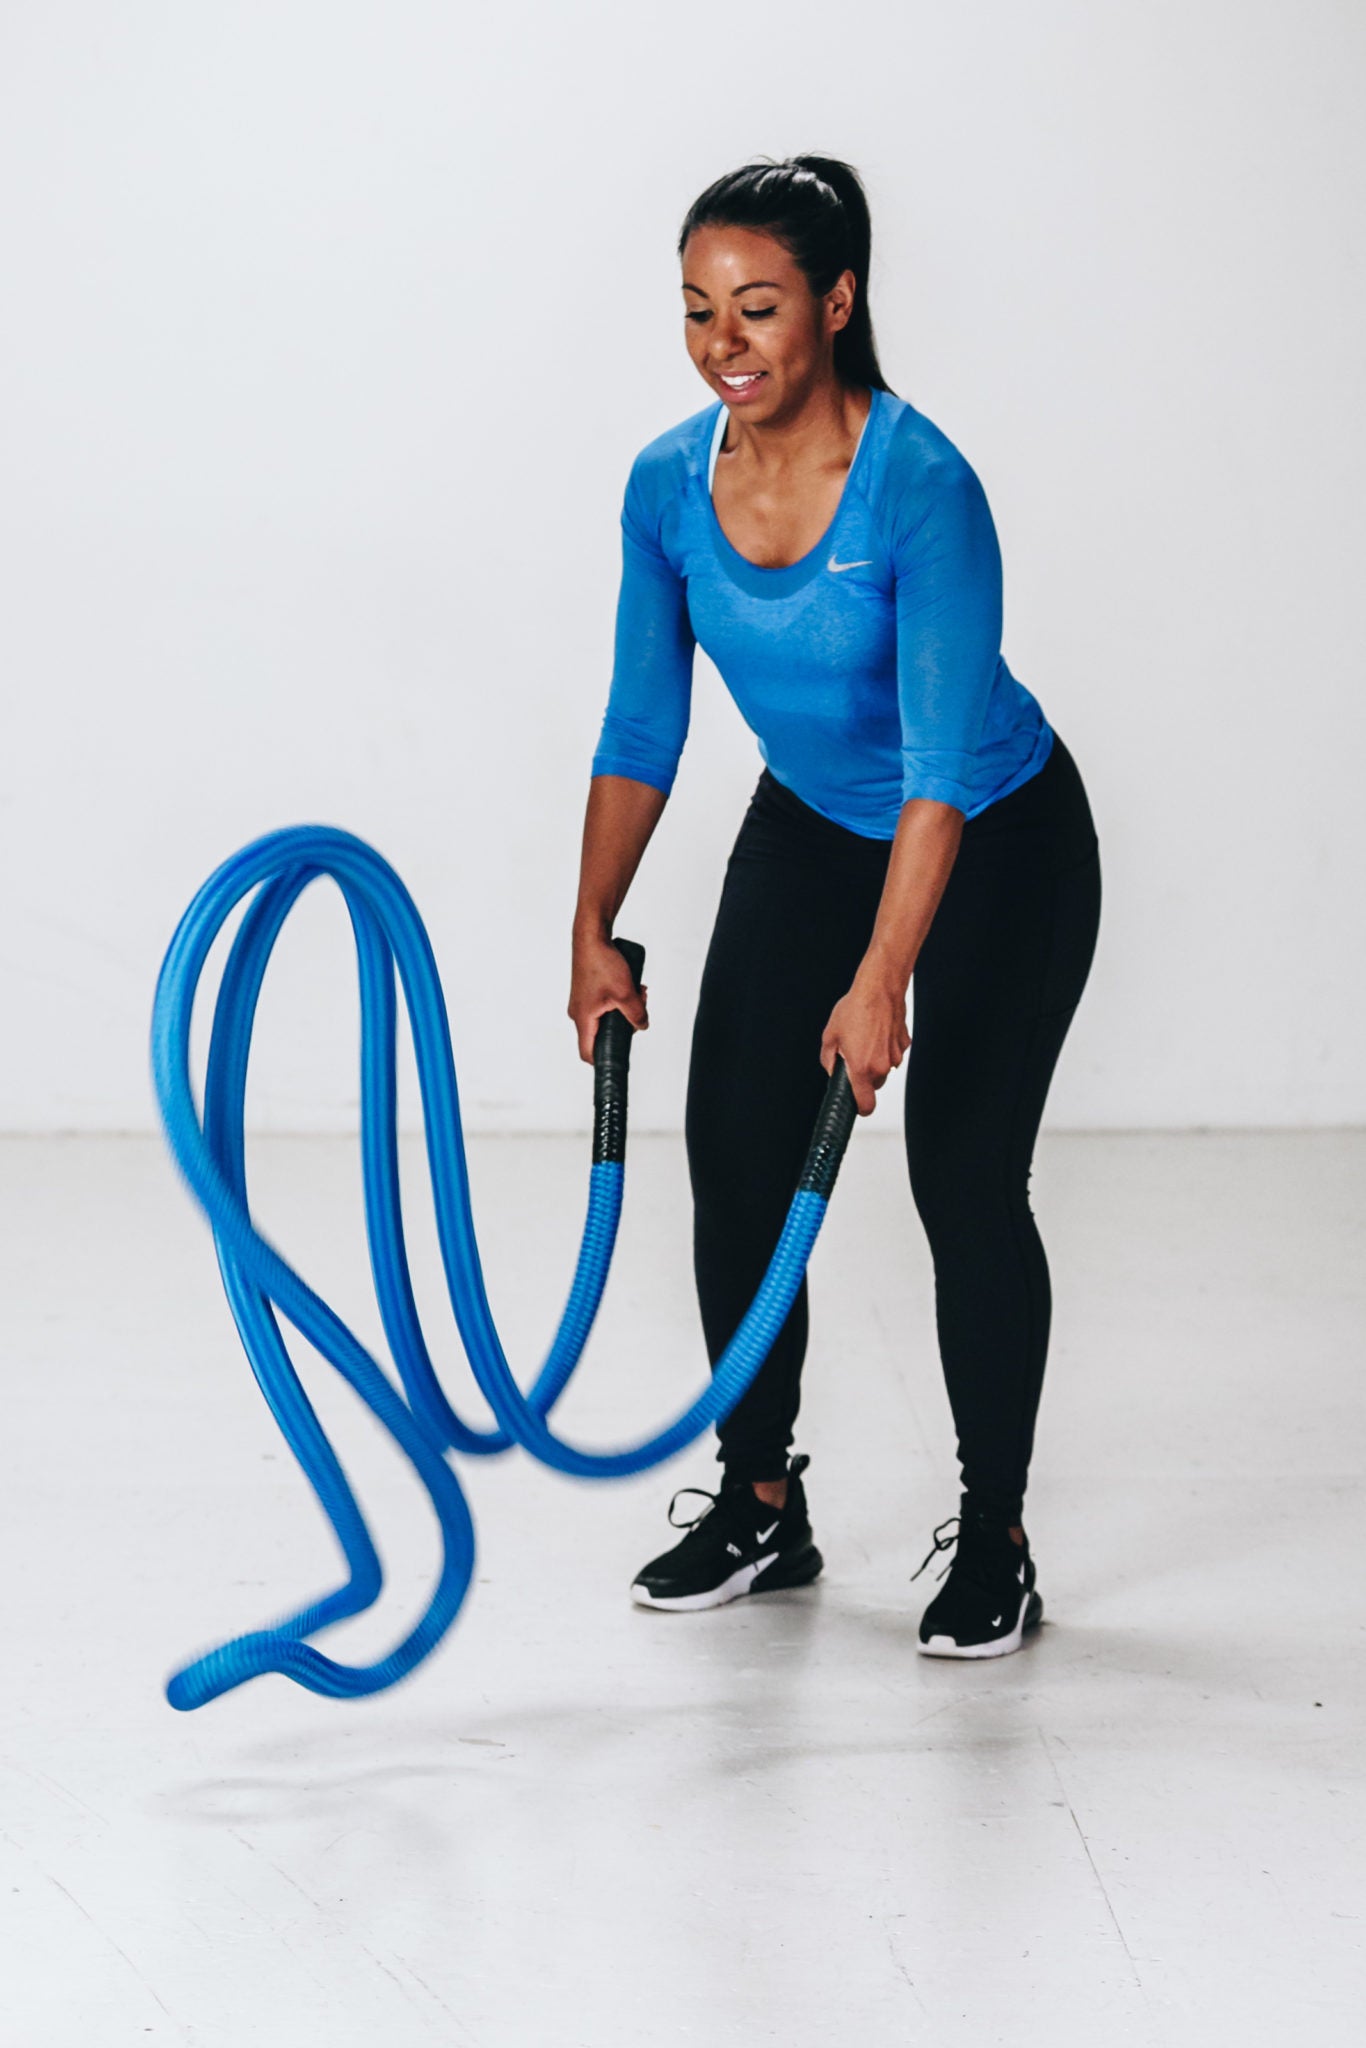 Image of female model doing battle rope waves exercise with unanchored blue hyper rope that is floating off the ground